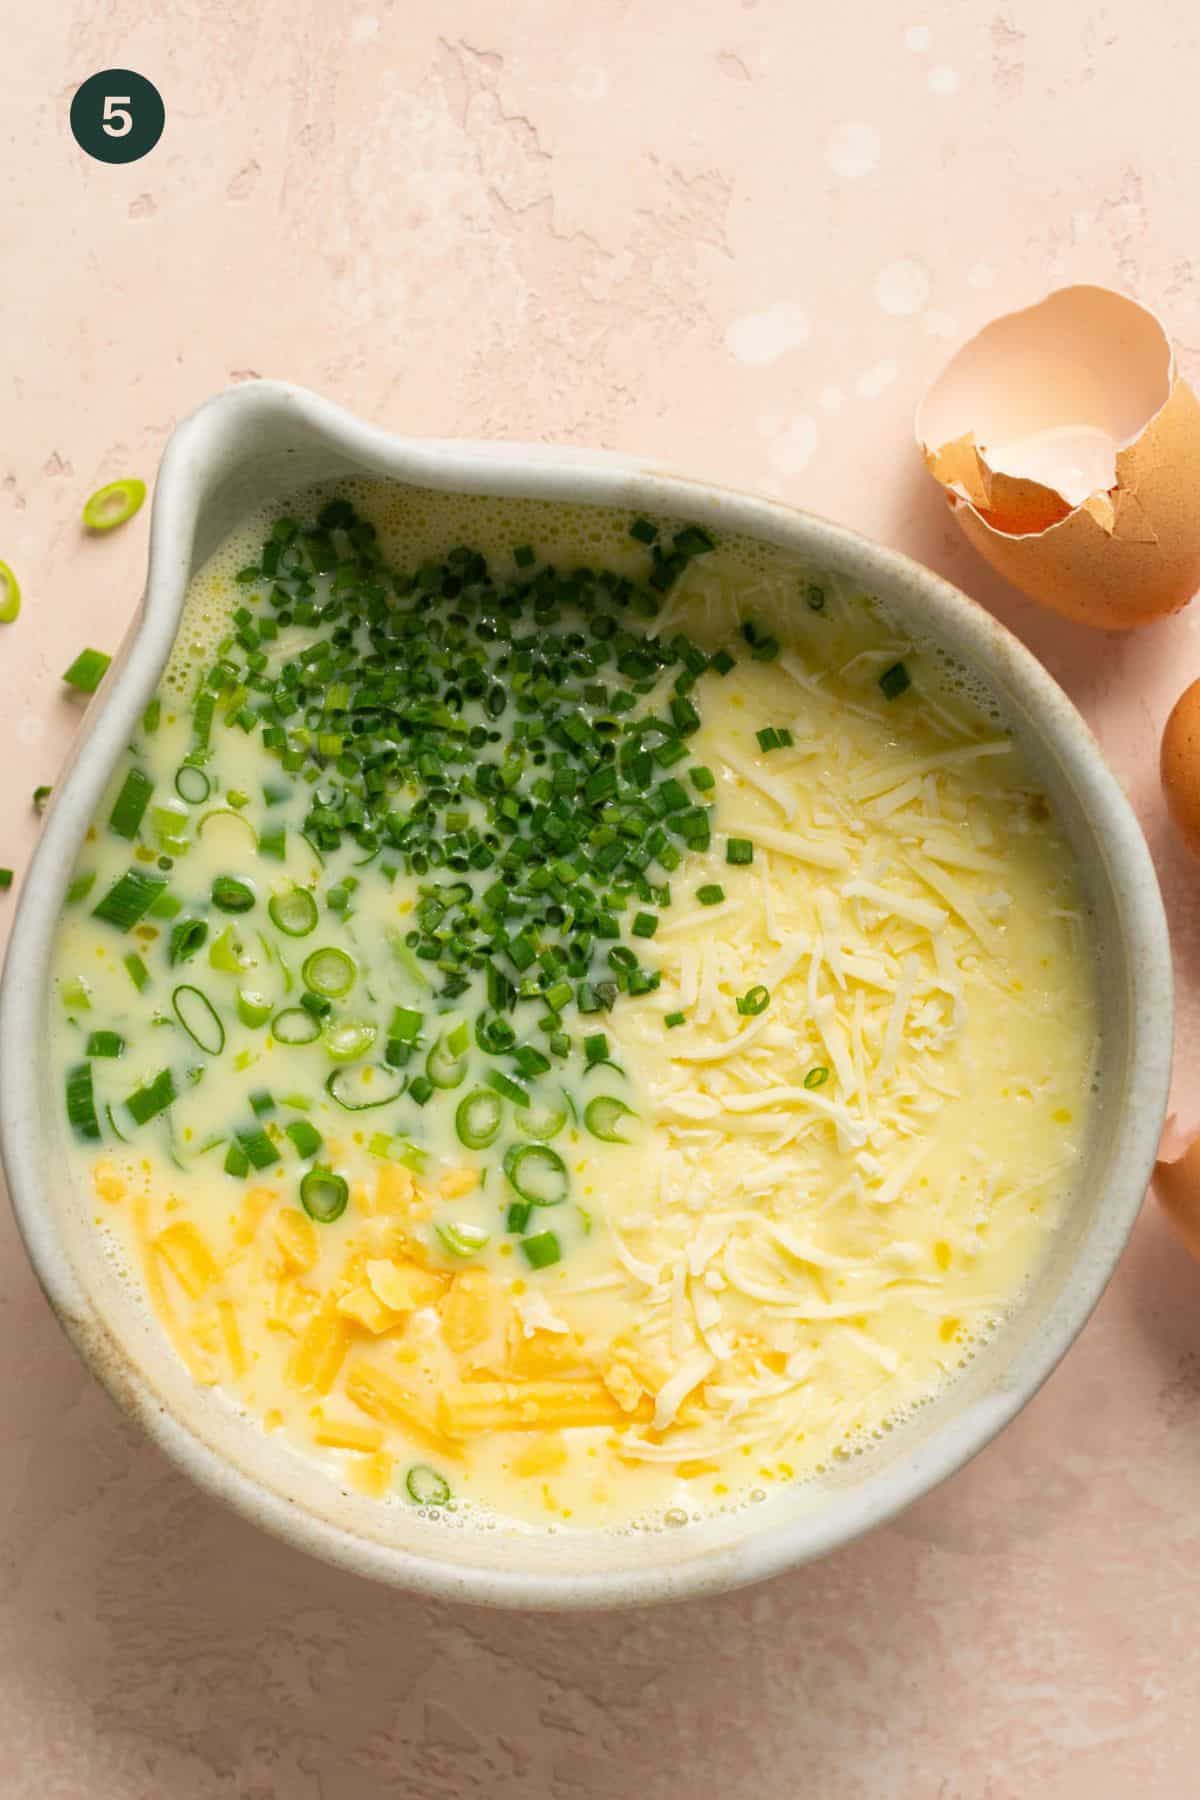 Chives, cheese and green onions added to egg and milk mixture.